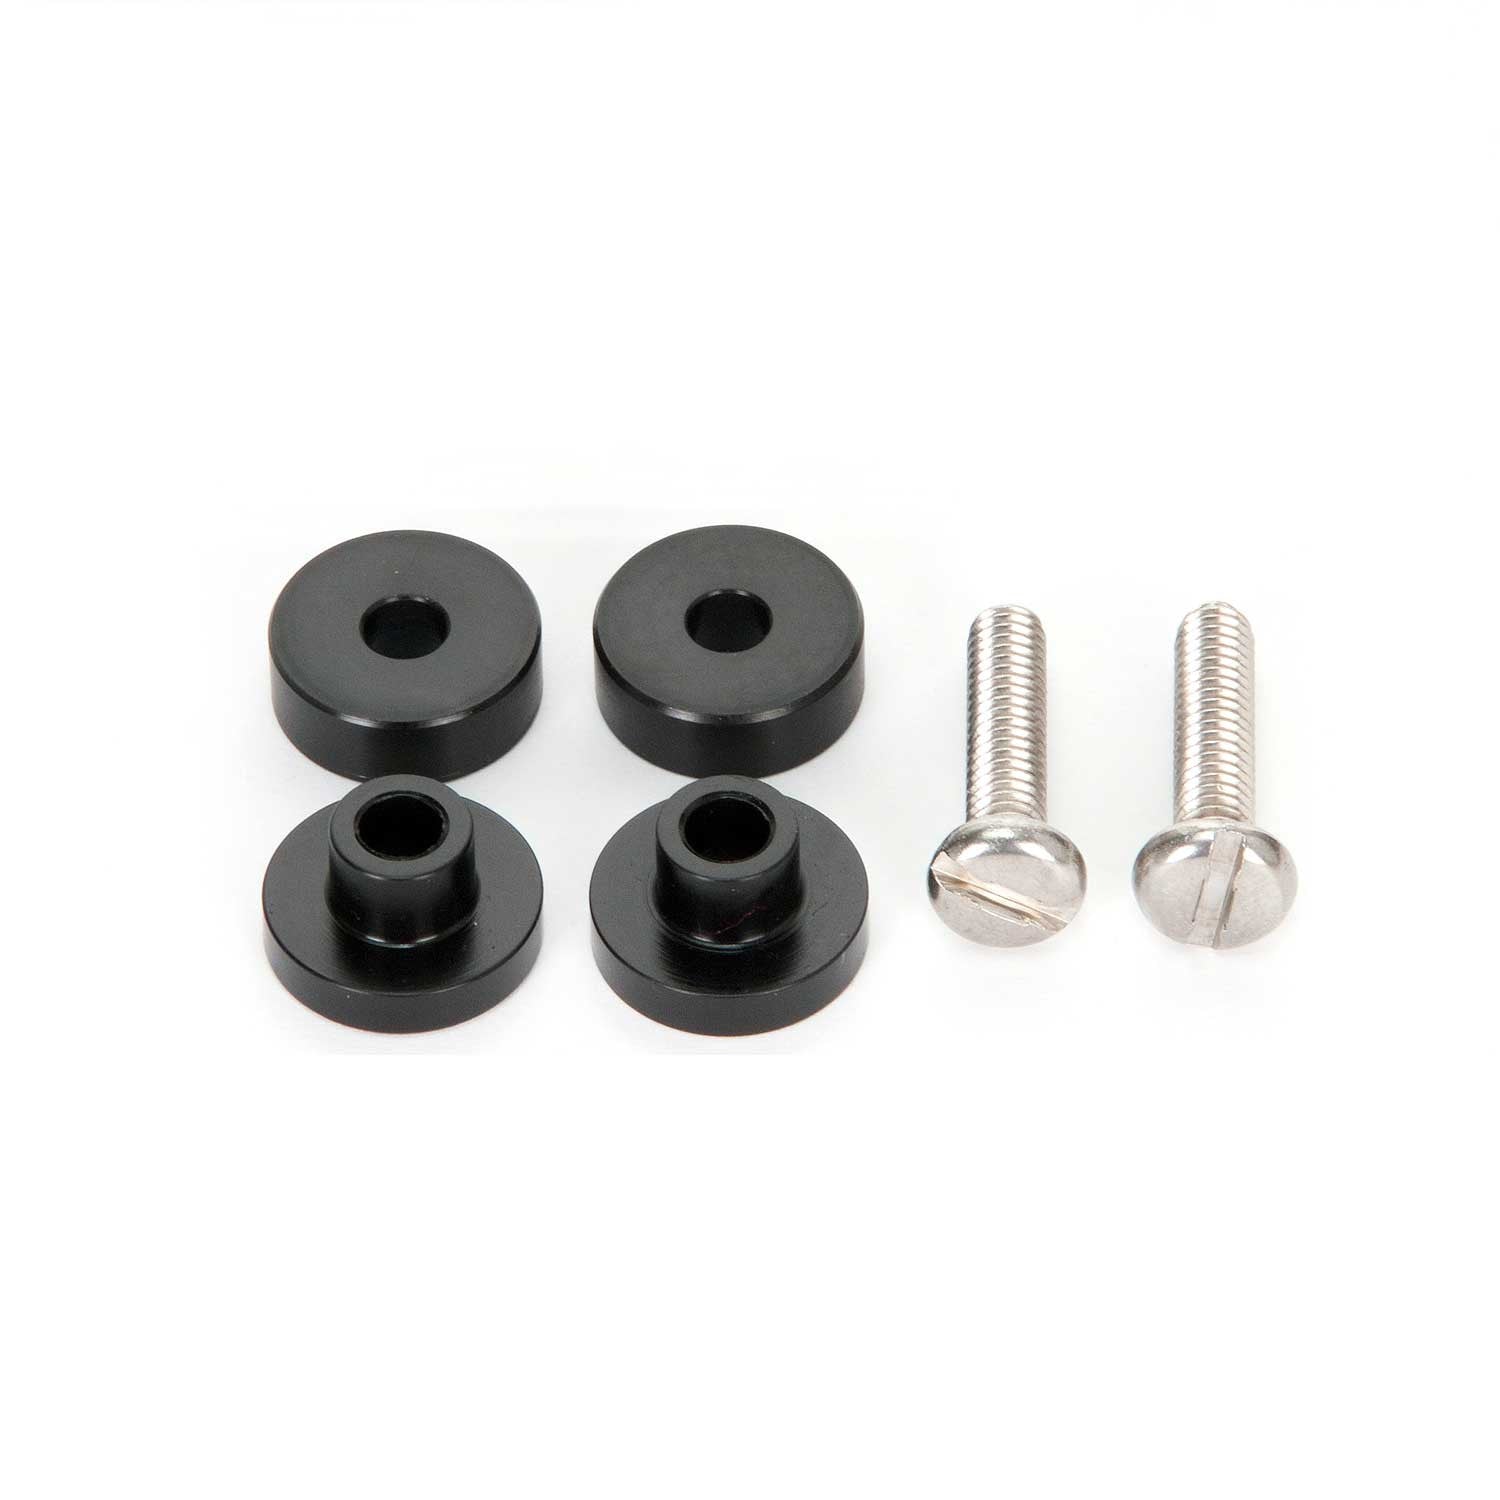 Tray Hardware 12-24 x 1 inch with Spacers